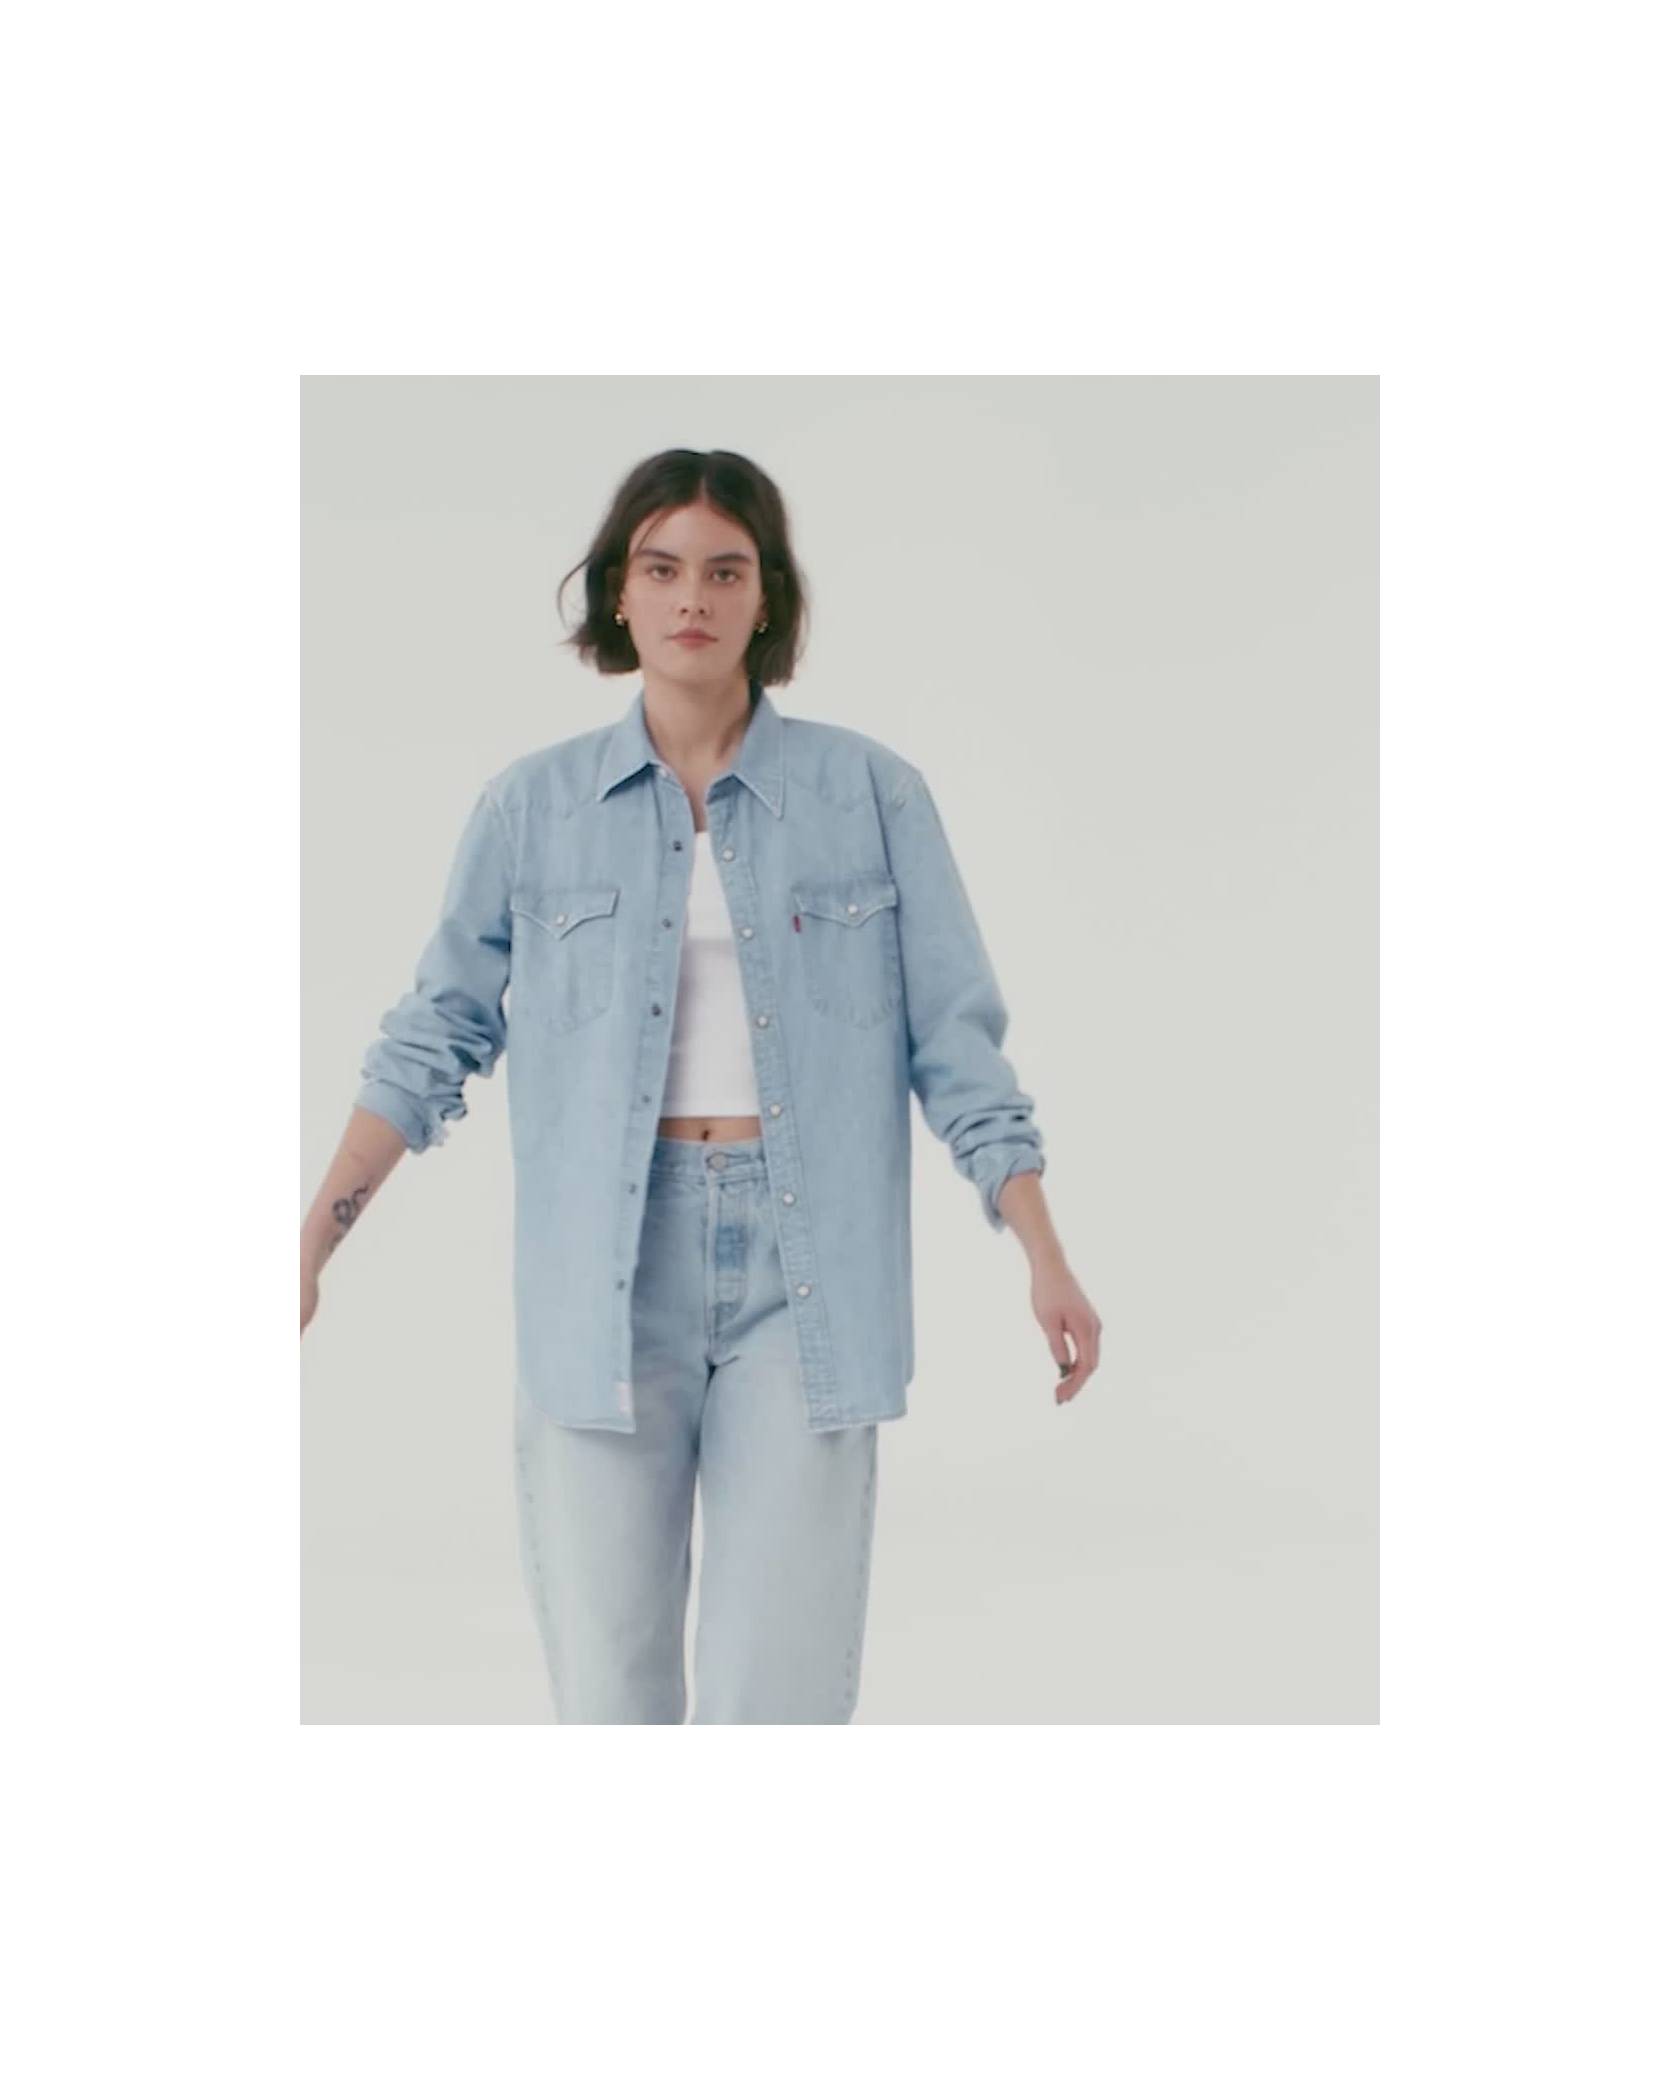 Video of model in women's light wash denim button down, light wash jeans and white tank